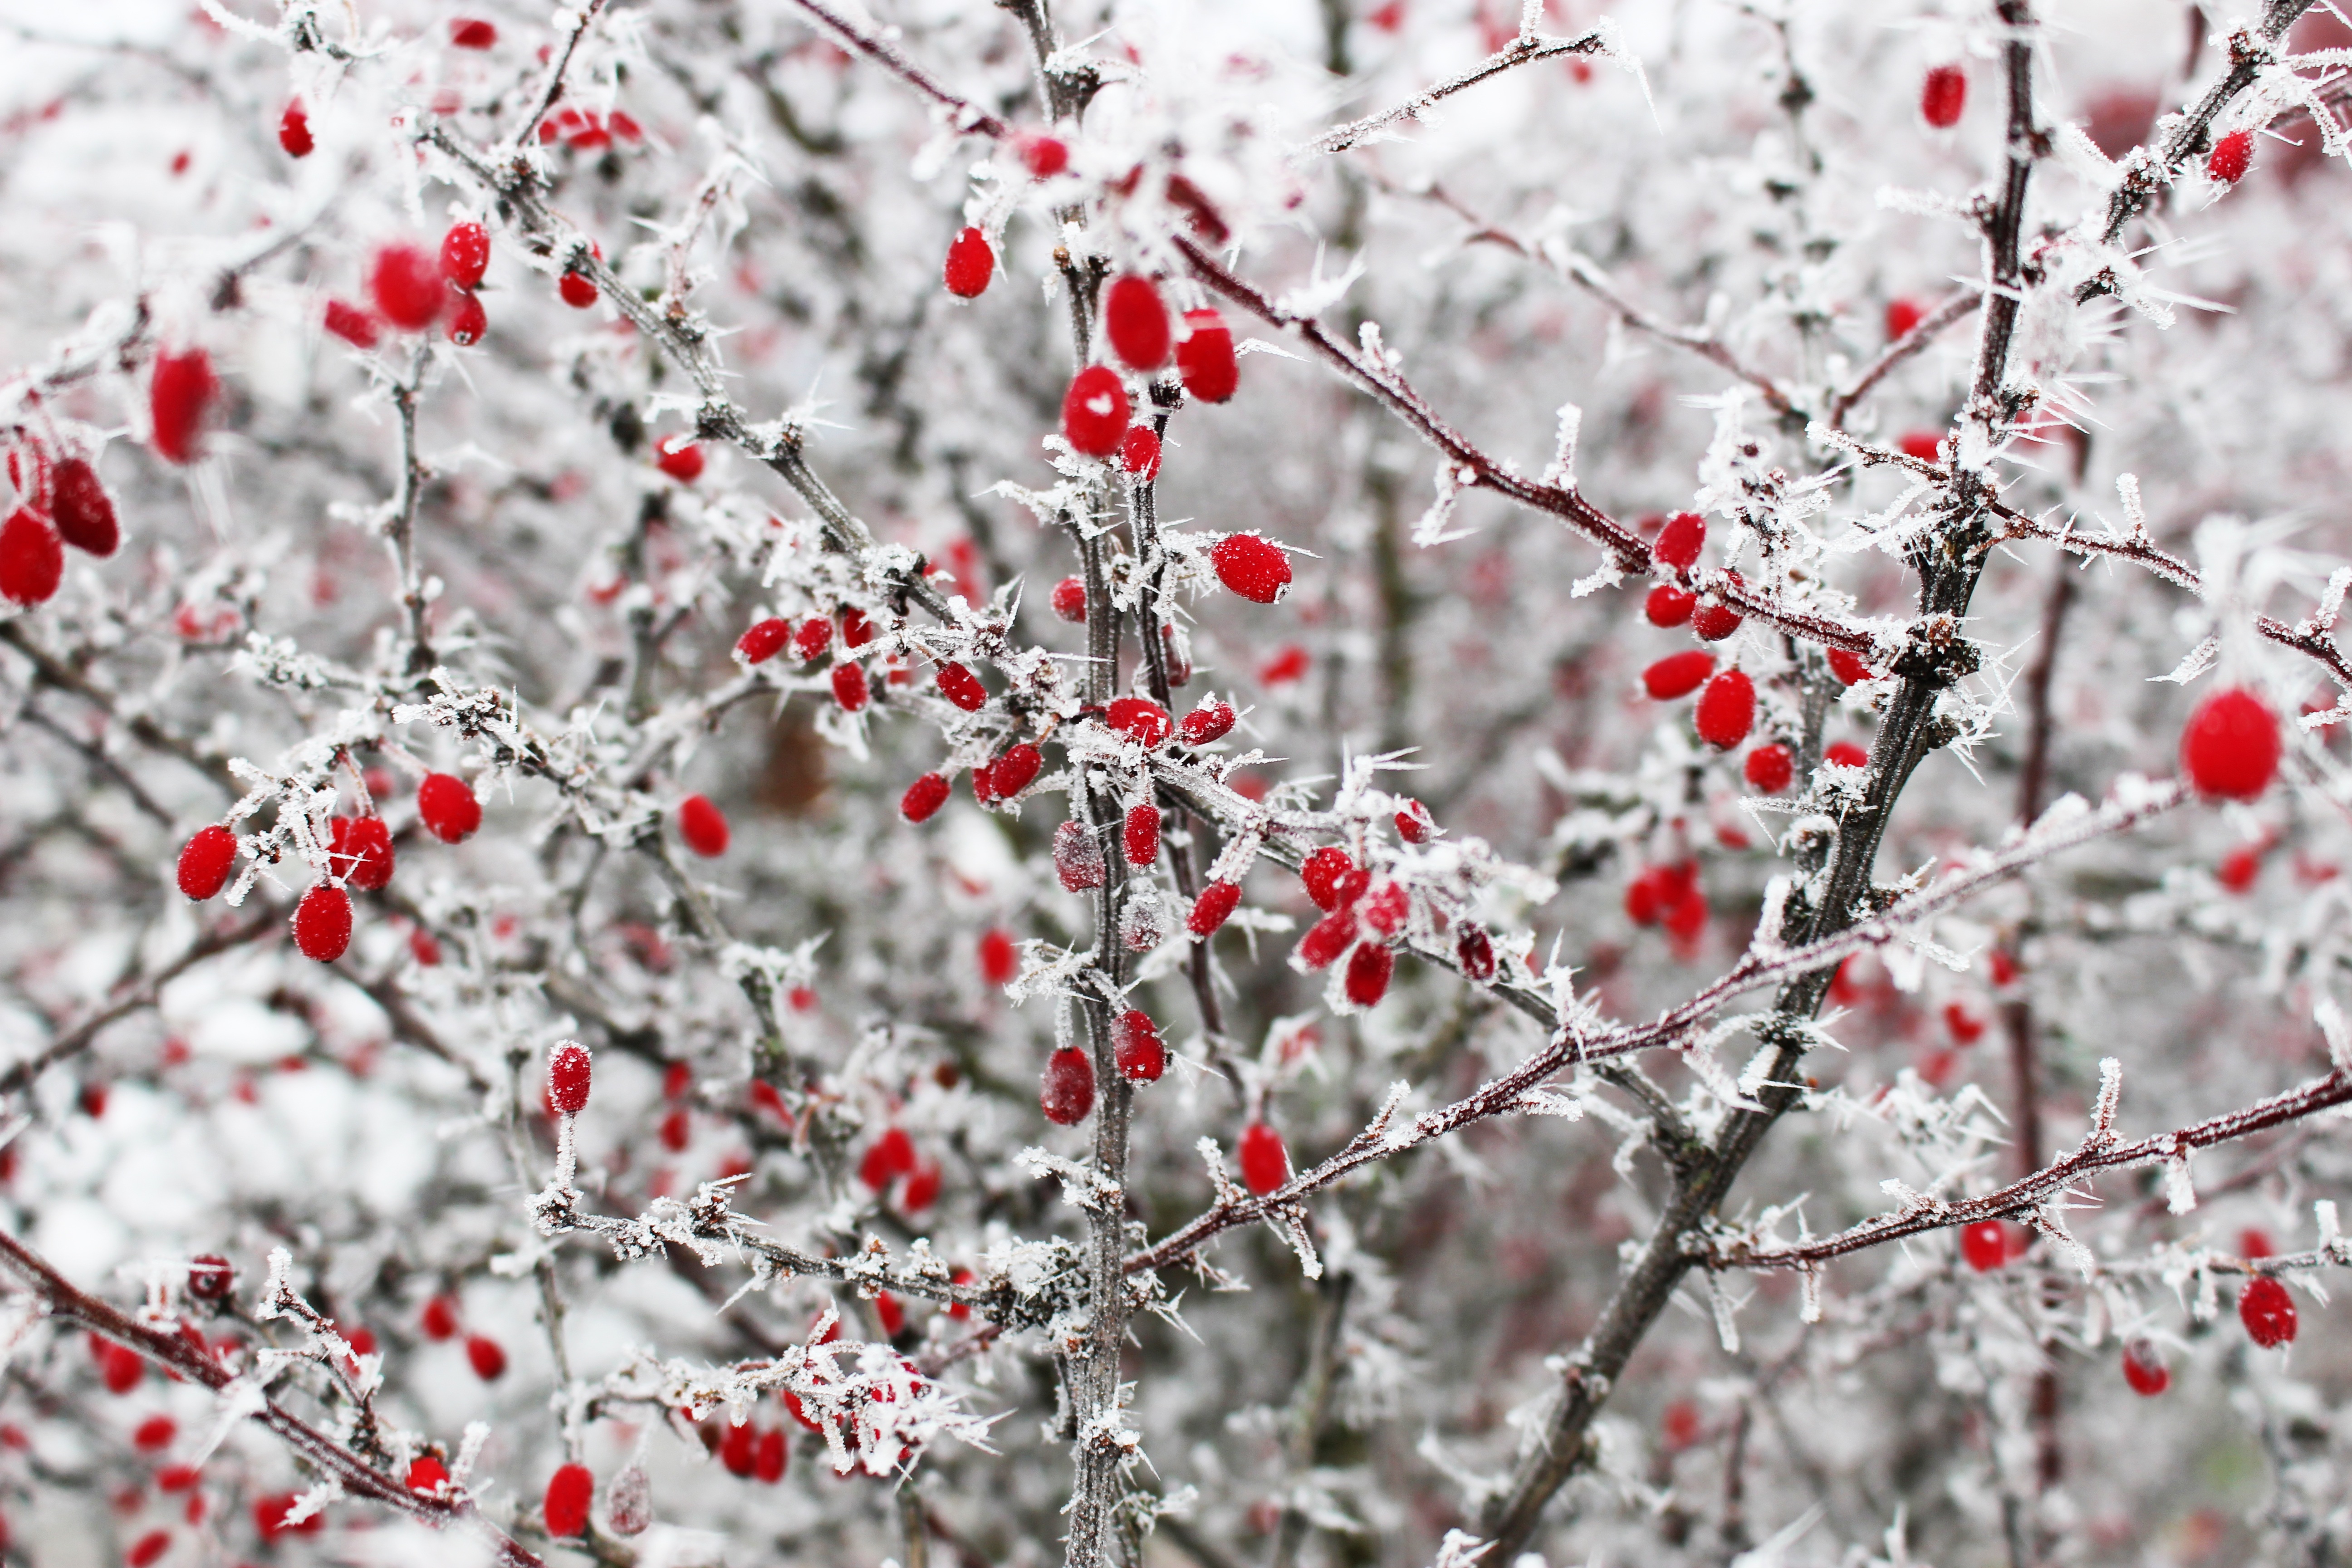 red, thorns, frost, winter, prickles, macro, branches, berries iphone wallpaper